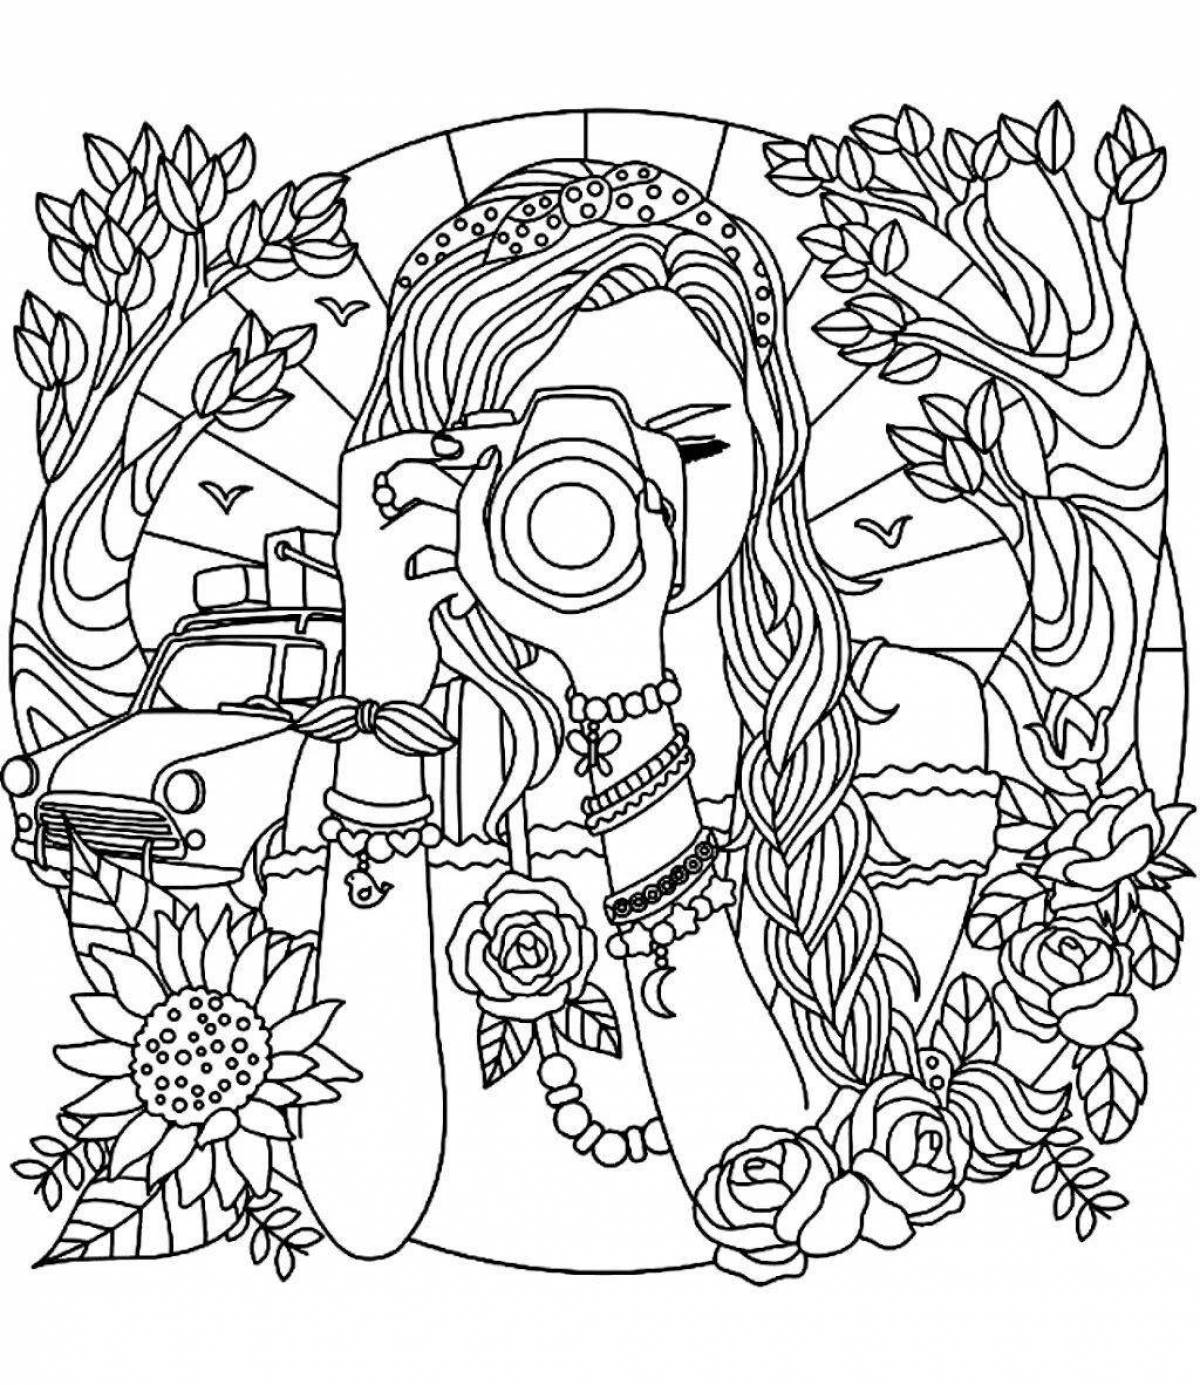 Creative adult coloring book